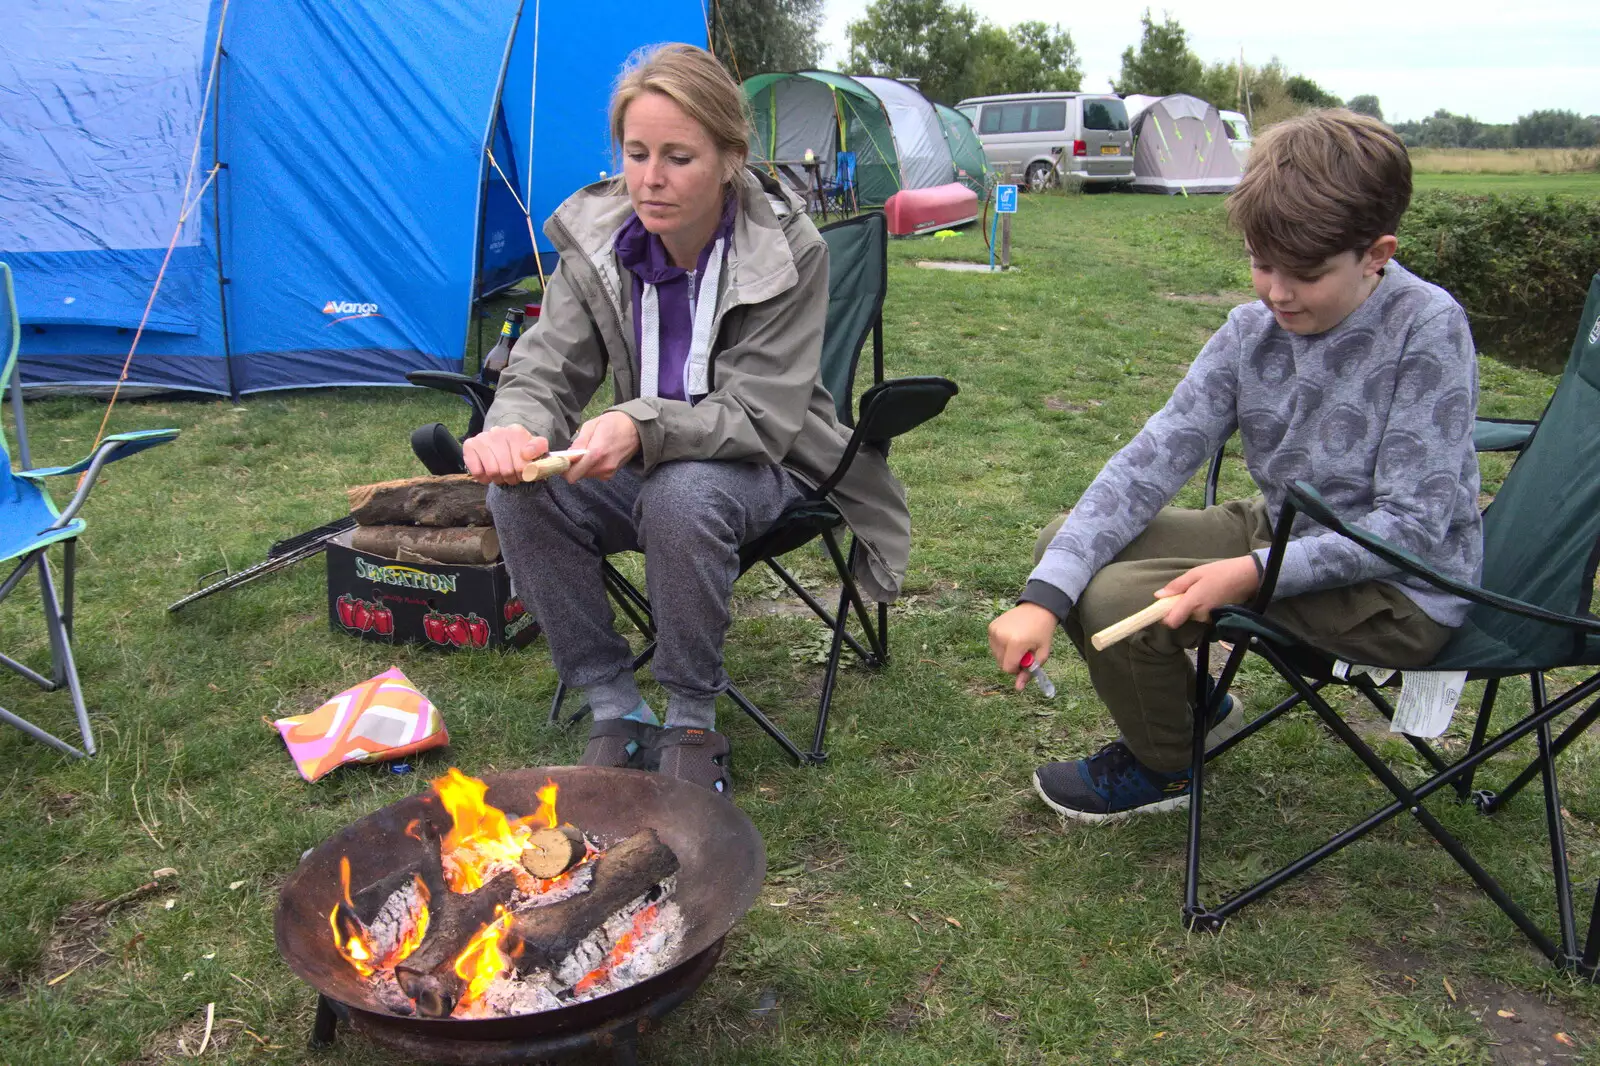 Allyson and Fred do some whittling, from Camping at Three Rivers, Geldeston, Norfolk - 5th September 2020